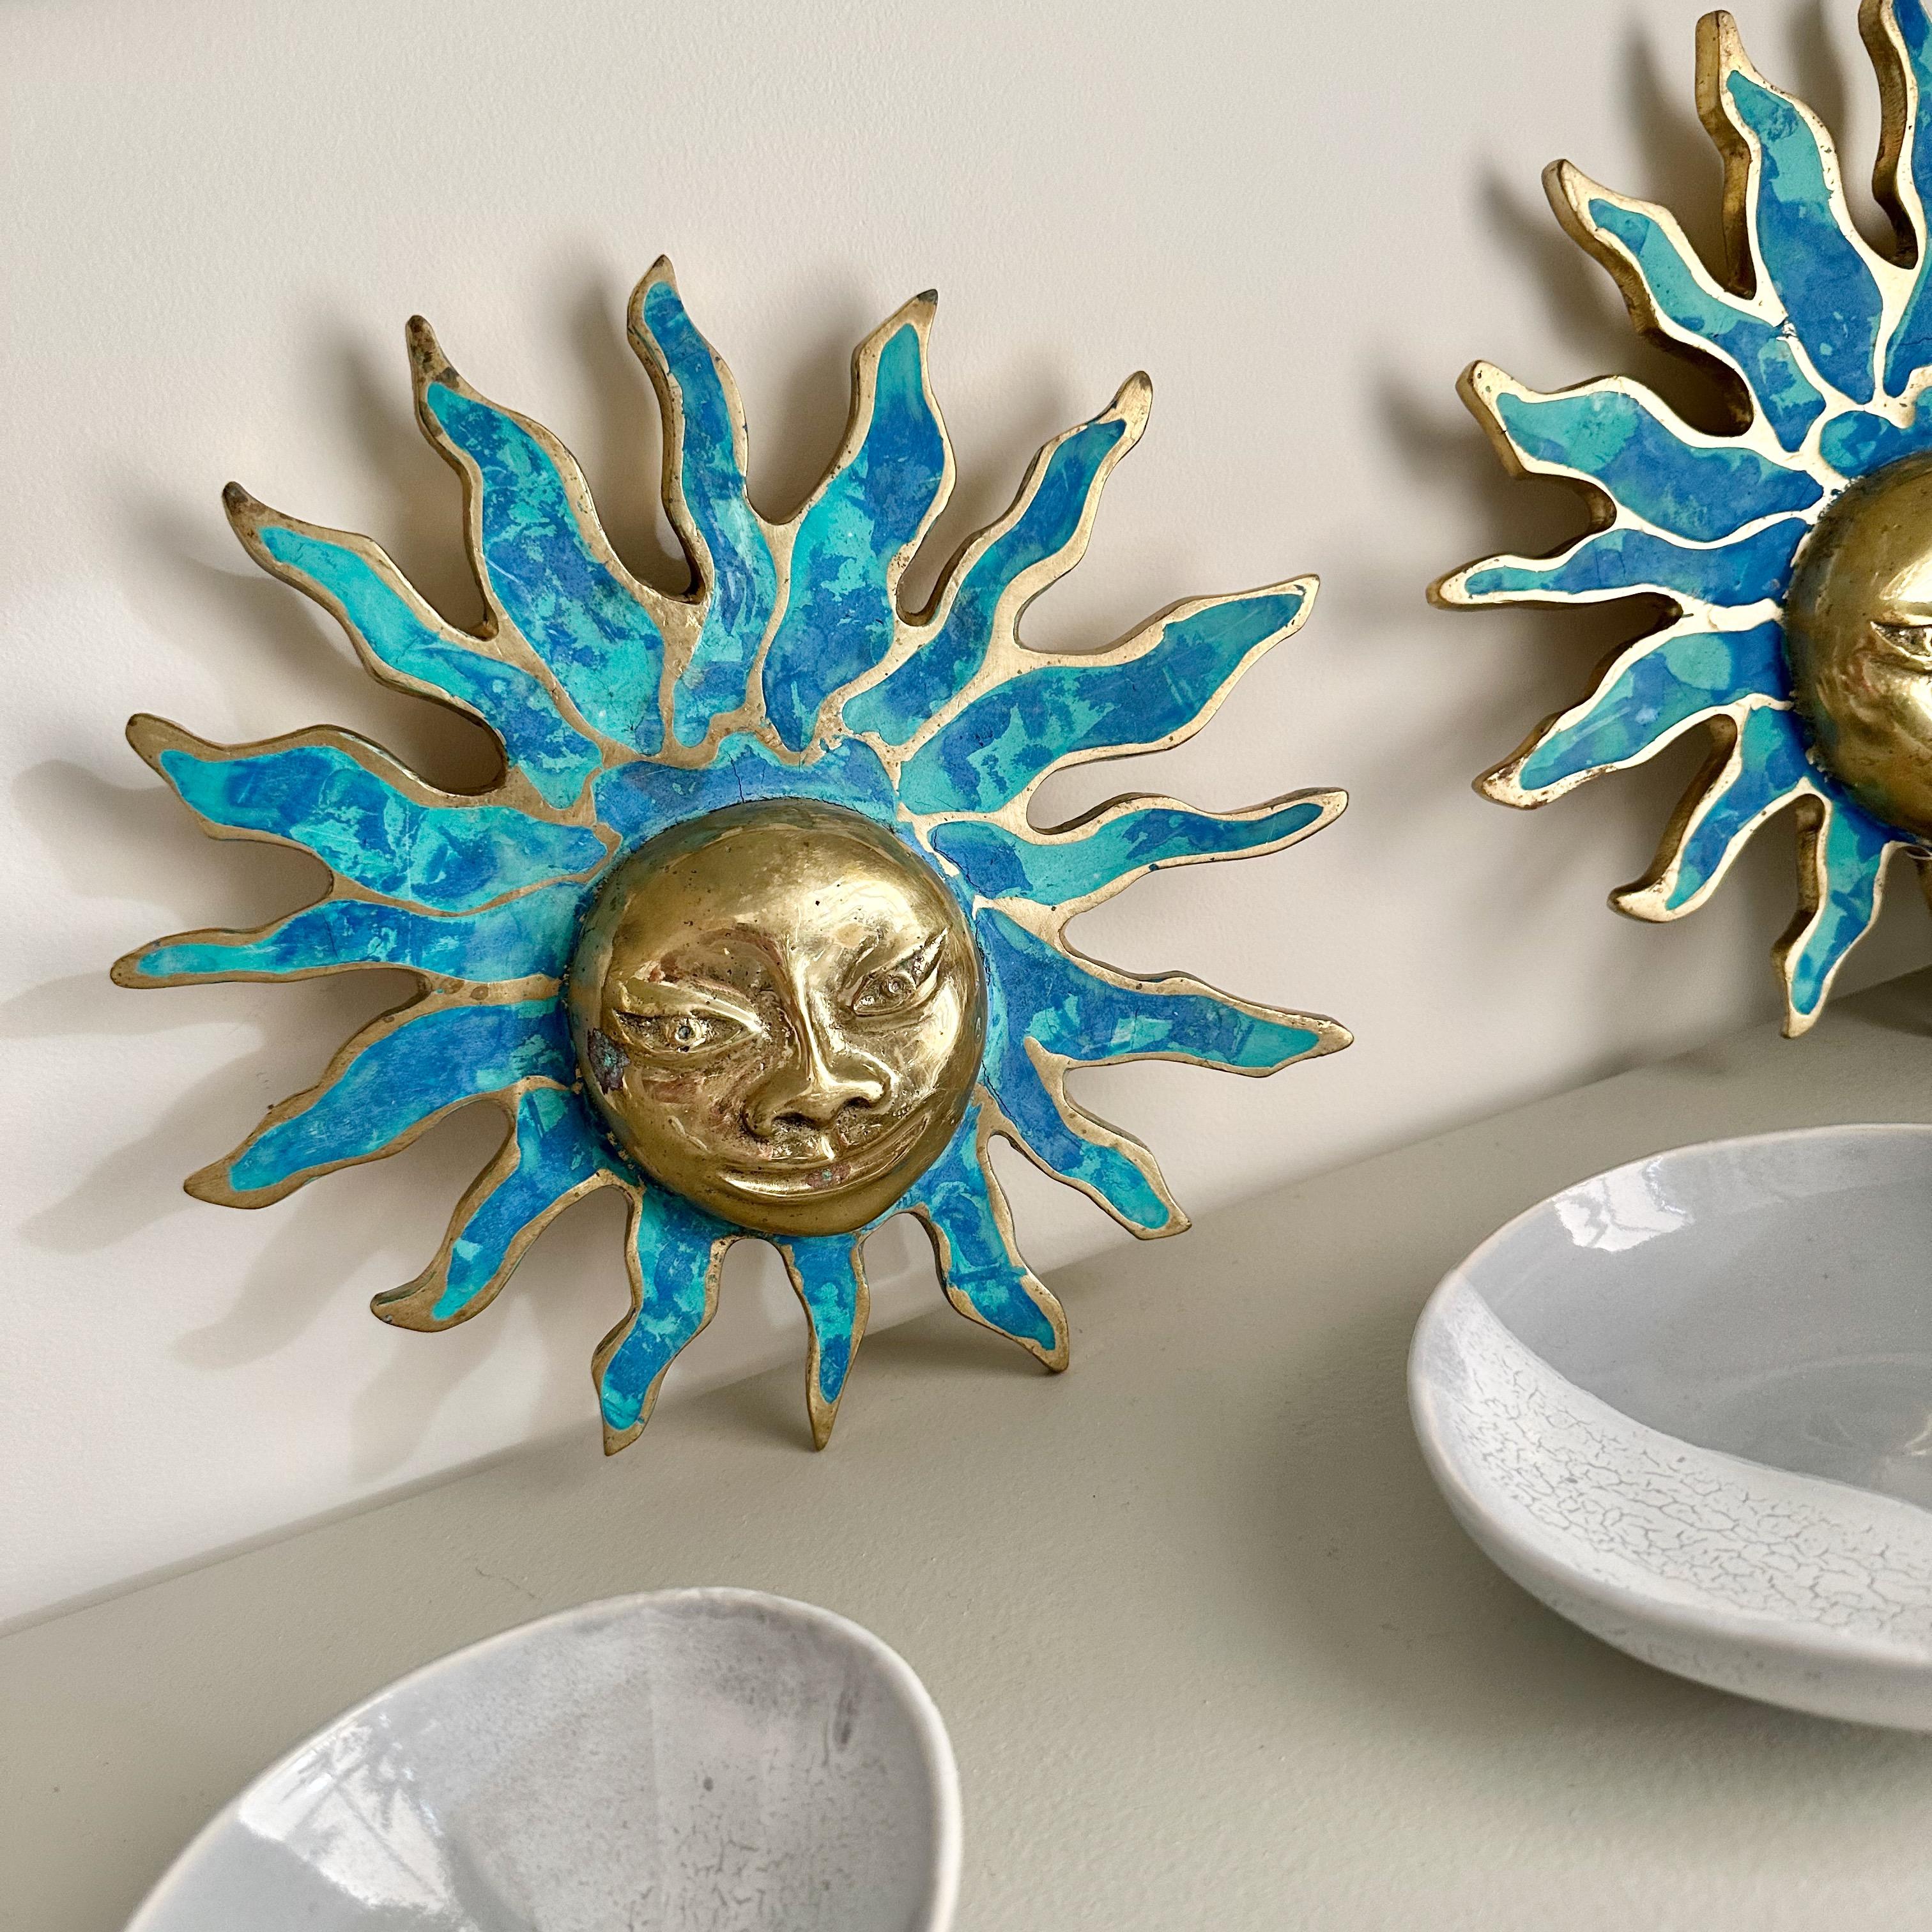 Pair of signed Pepe Mendoza sun face door pulls or handles.
Turquoise green malachite enameled stone set within cast bronze sun with brass face.
10 inches diameter. 
Rasplandor - 'a contemporary interpretation of an ancient sun god. Due to the smile